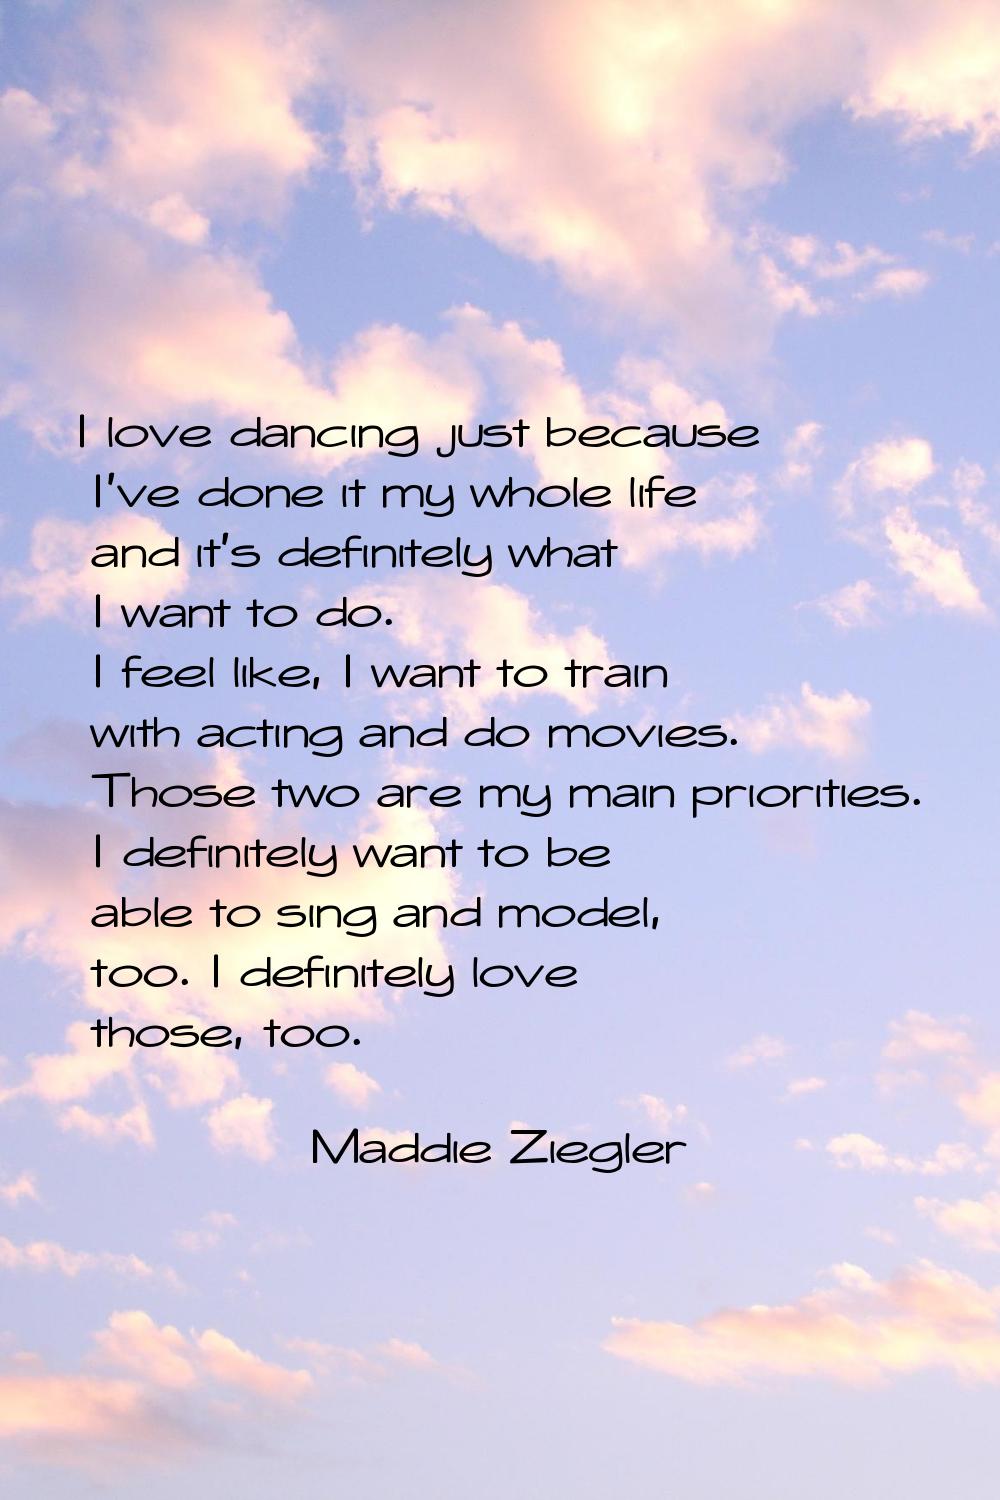 I love dancing just because I've done it my whole life and it's definitely what I want to do. I fee